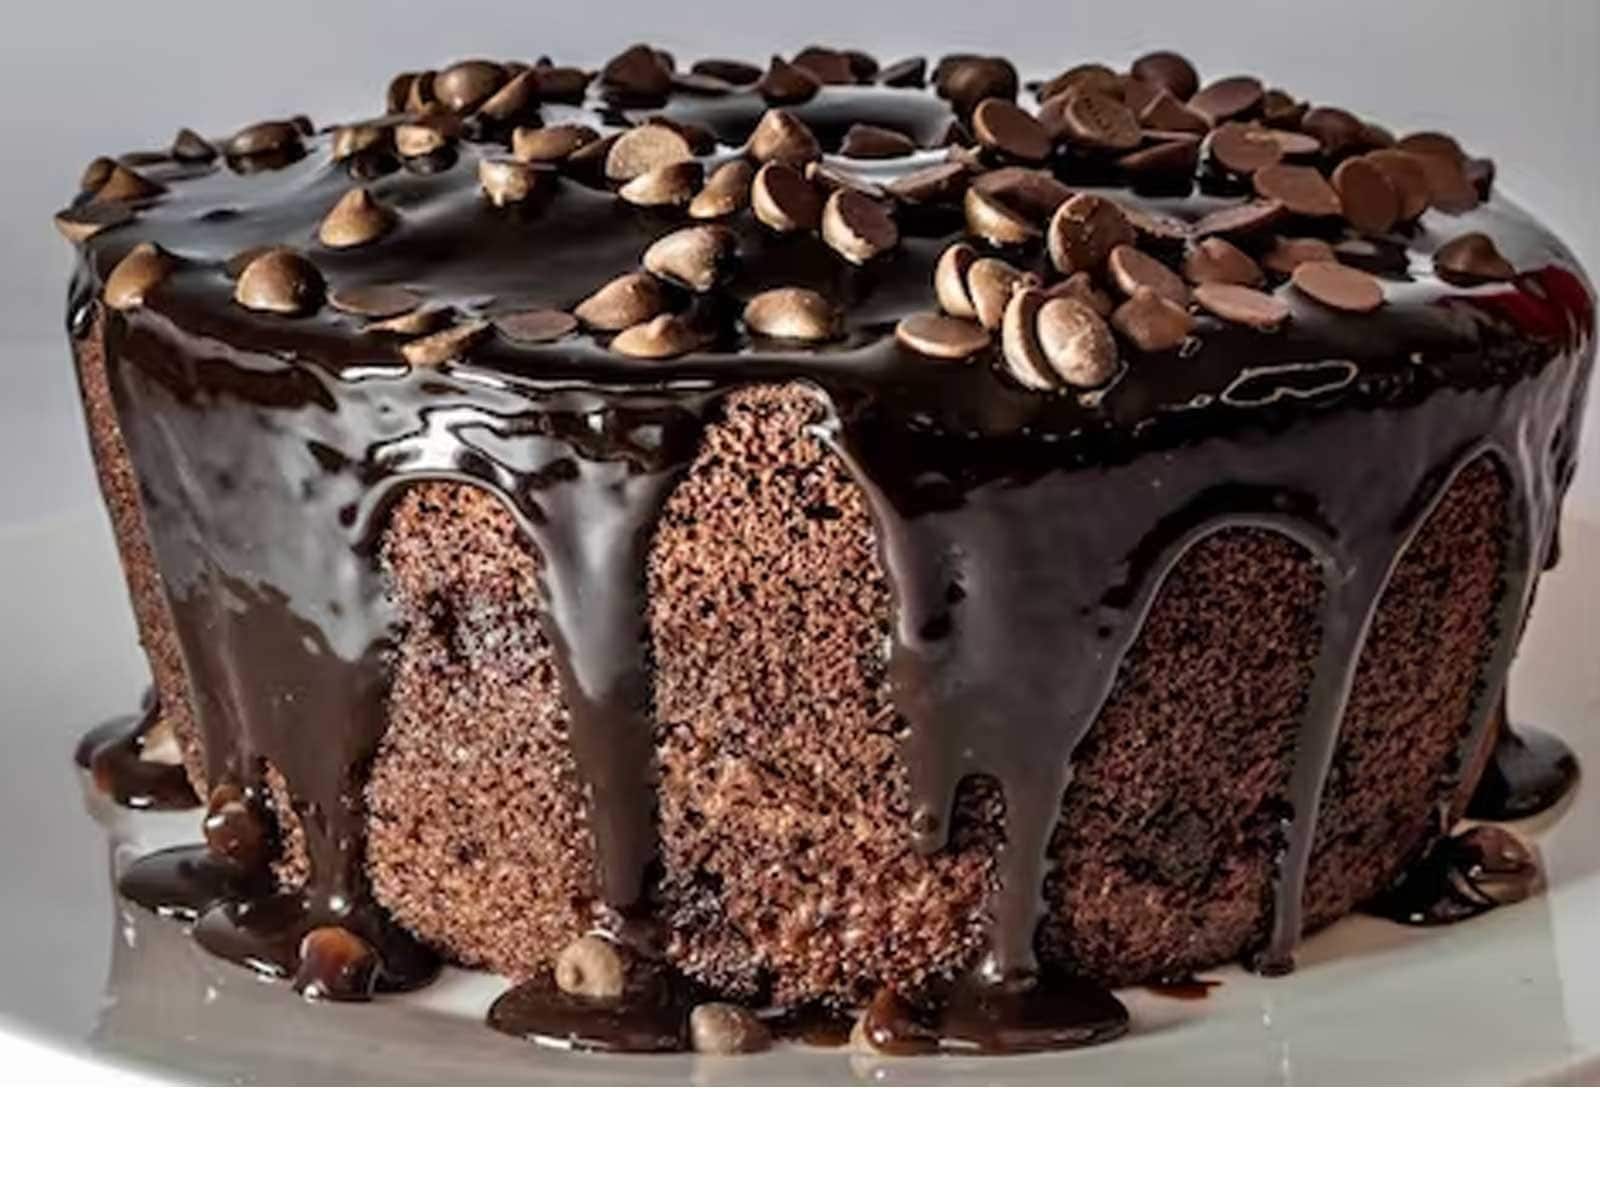 Online Cake Delivery in Ashok-Nagar - 50% Off - Now Rs 349 | IndiaCakes